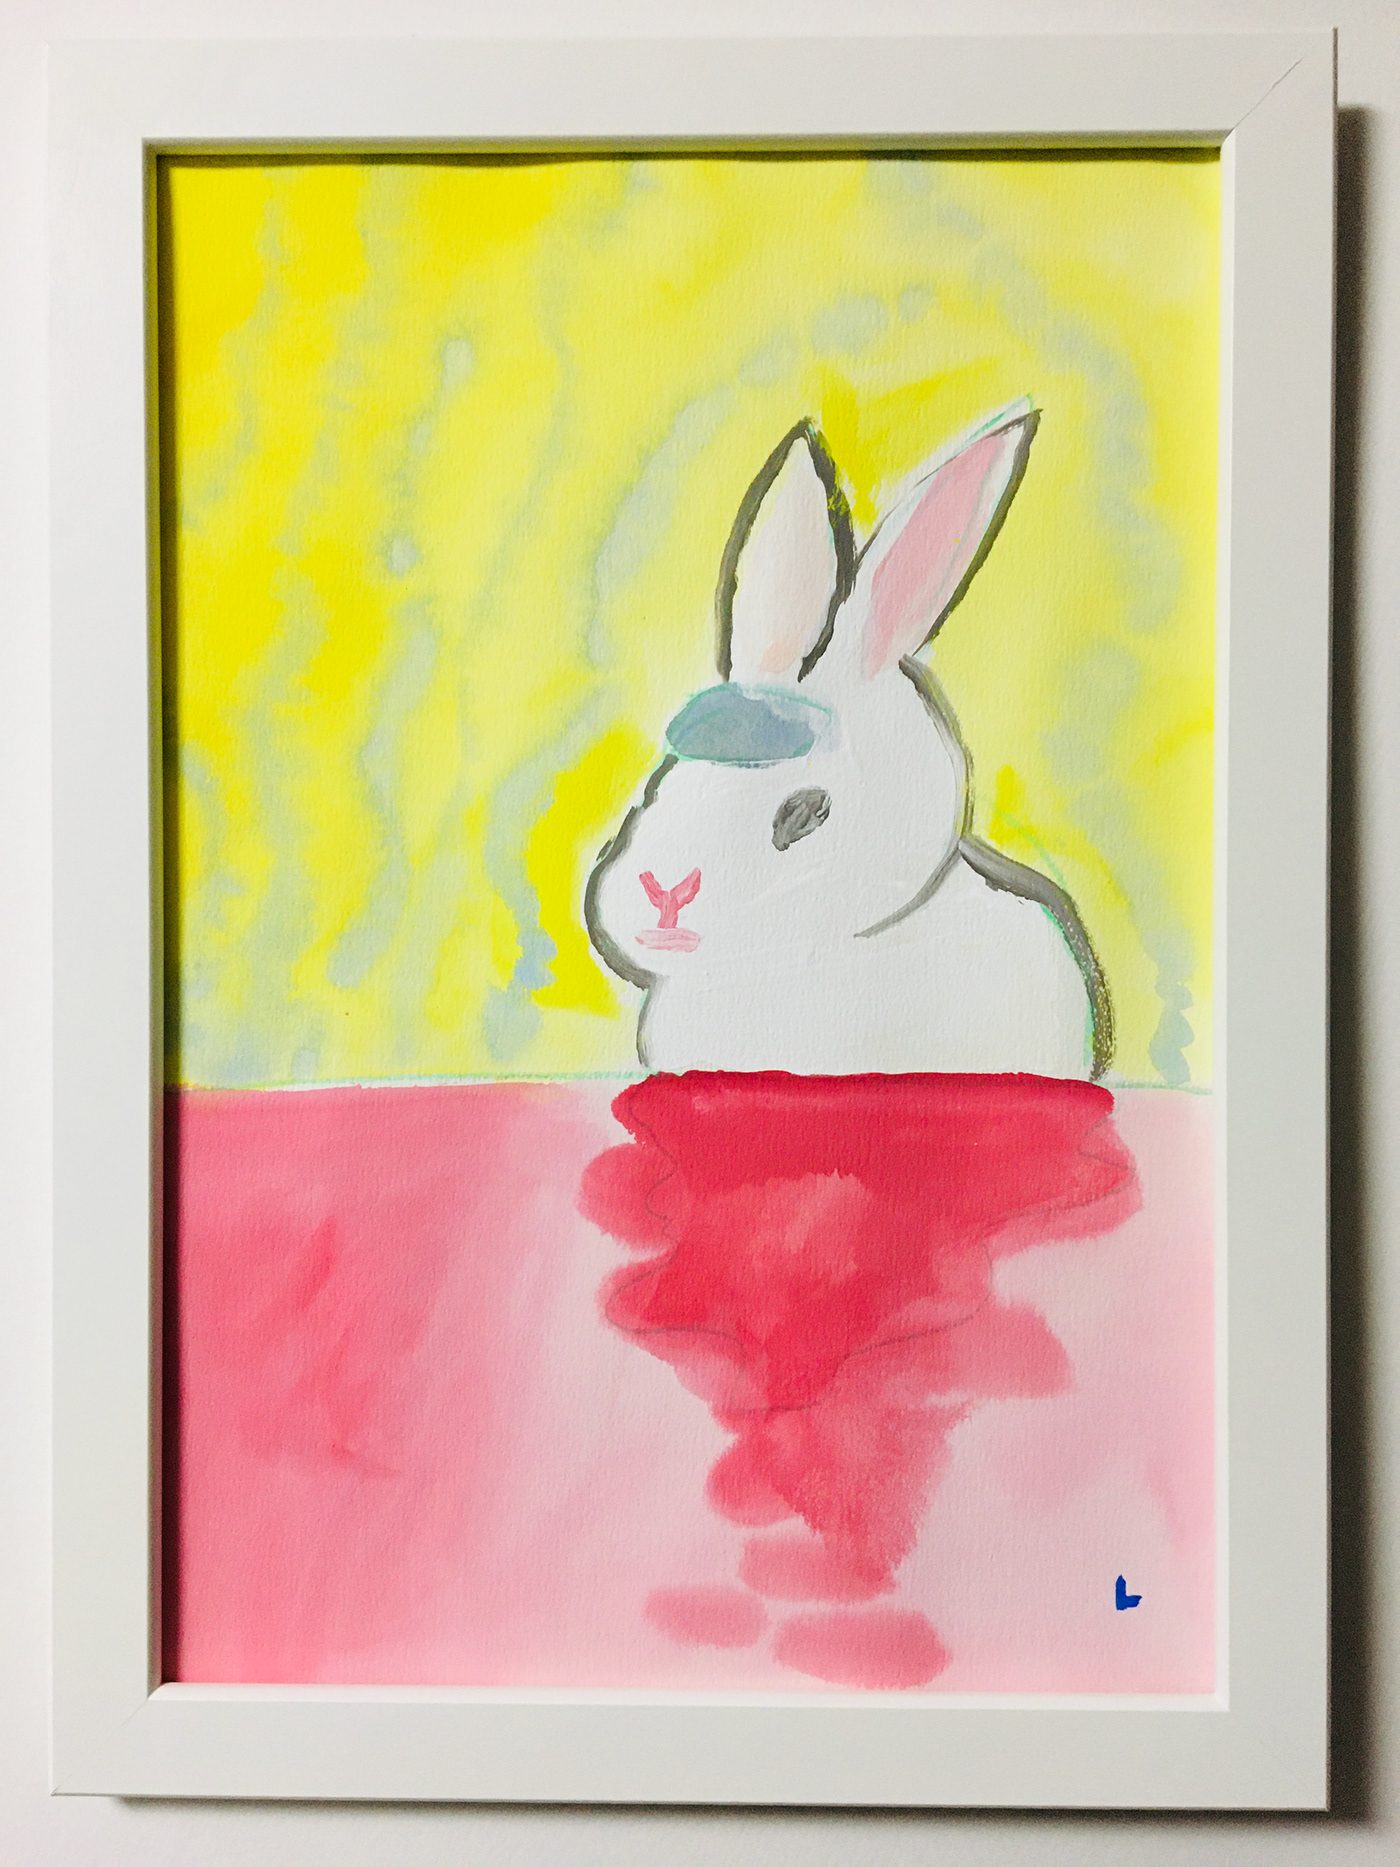 Acrylic paintng animal art artwork bath colorful Drawing  ILLUSTRATION  Illustrator image paintng pictures pink rabbit Steam warm